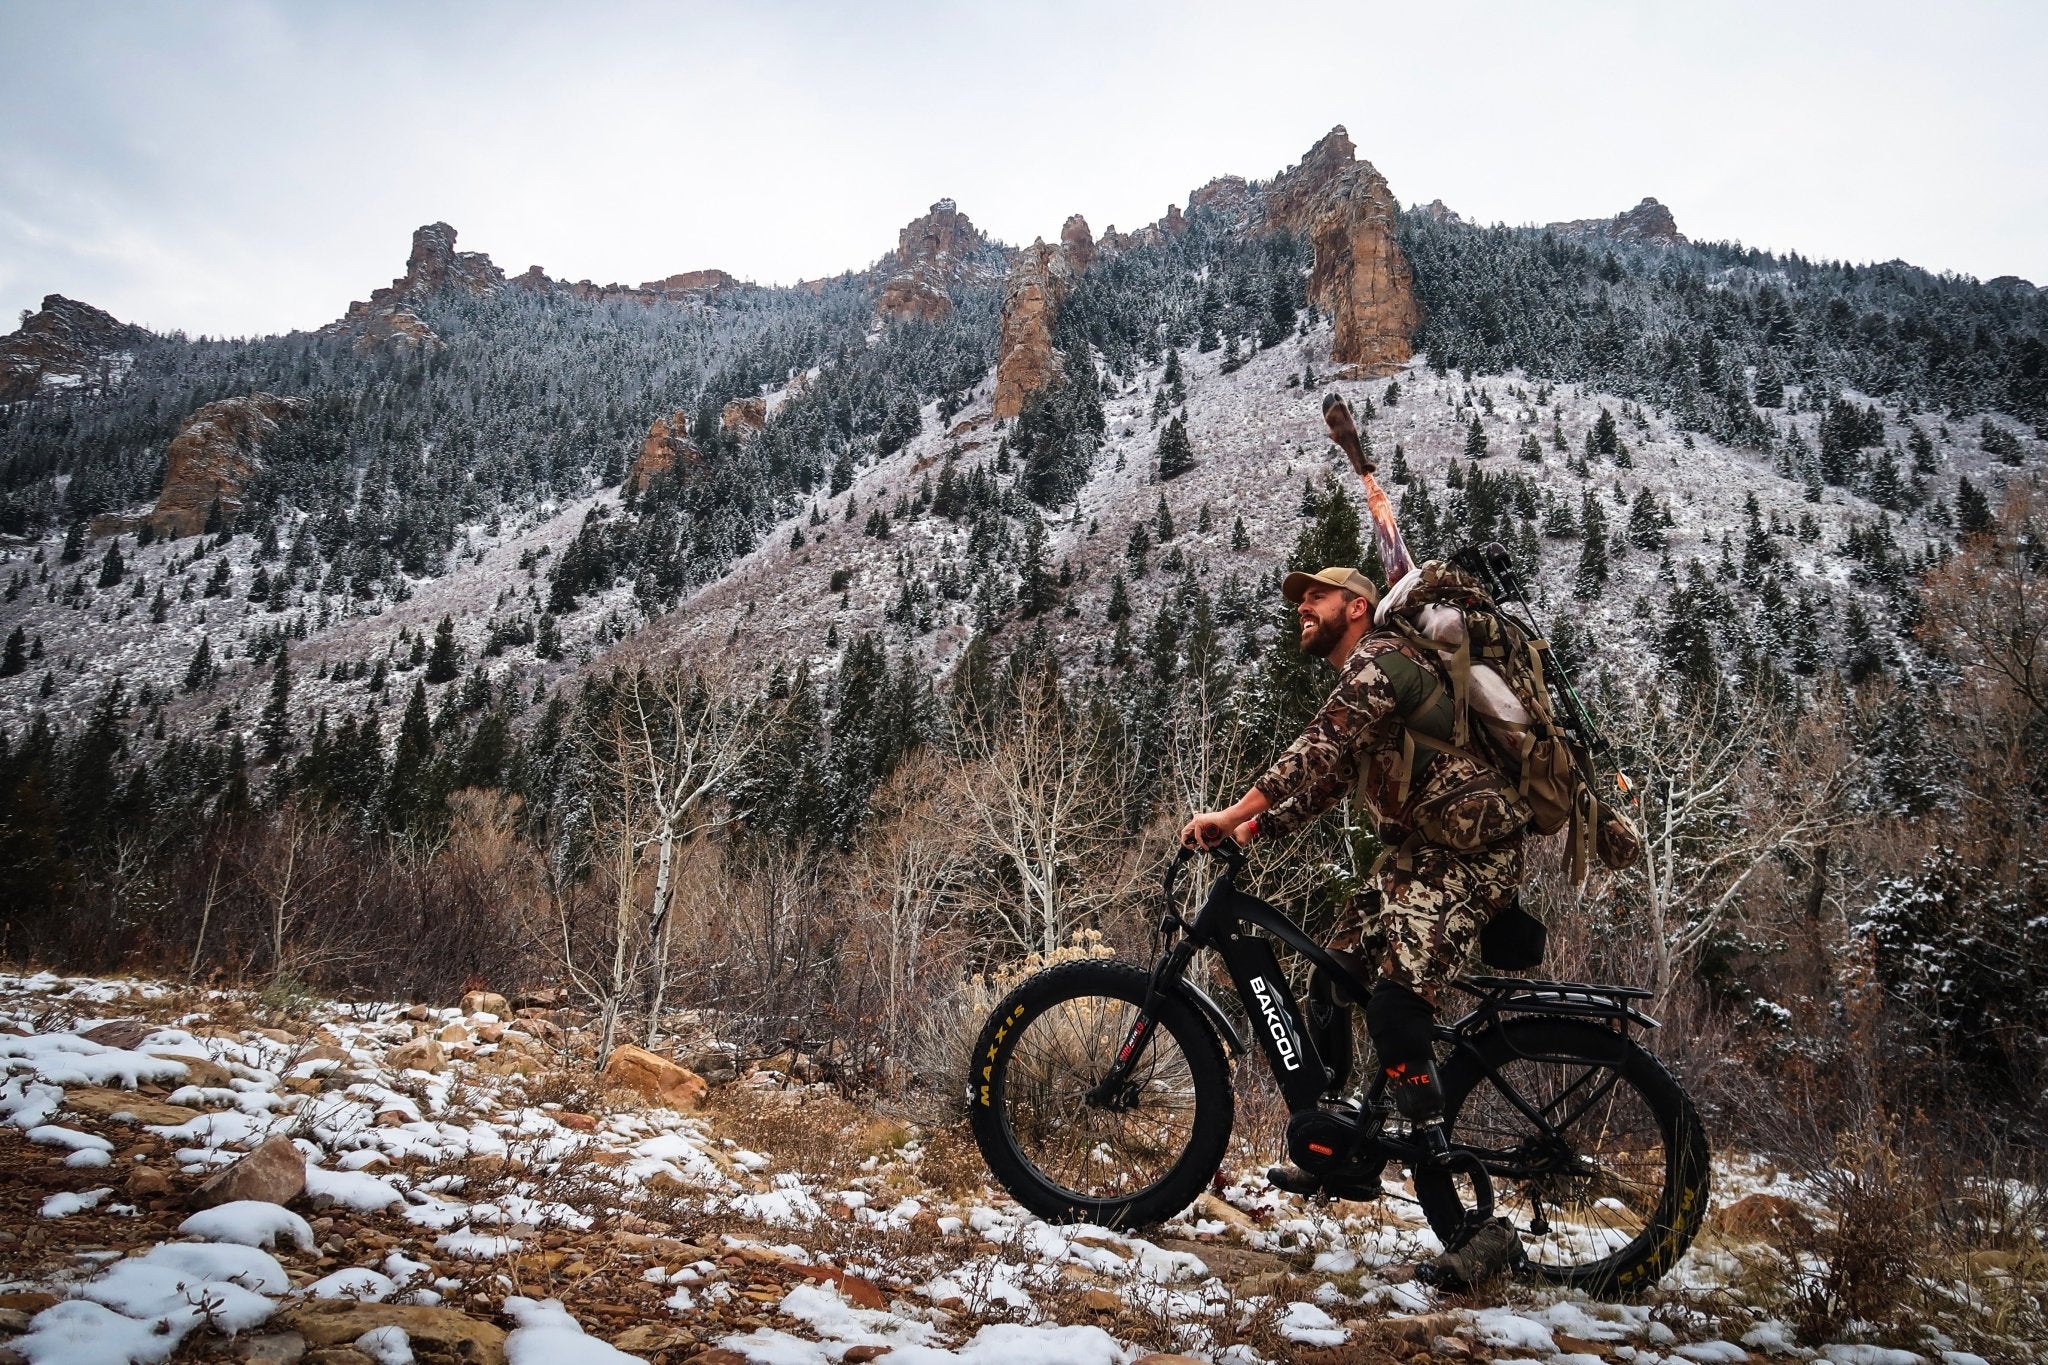 How to Power your EBike in the Backcountry - Bakcou